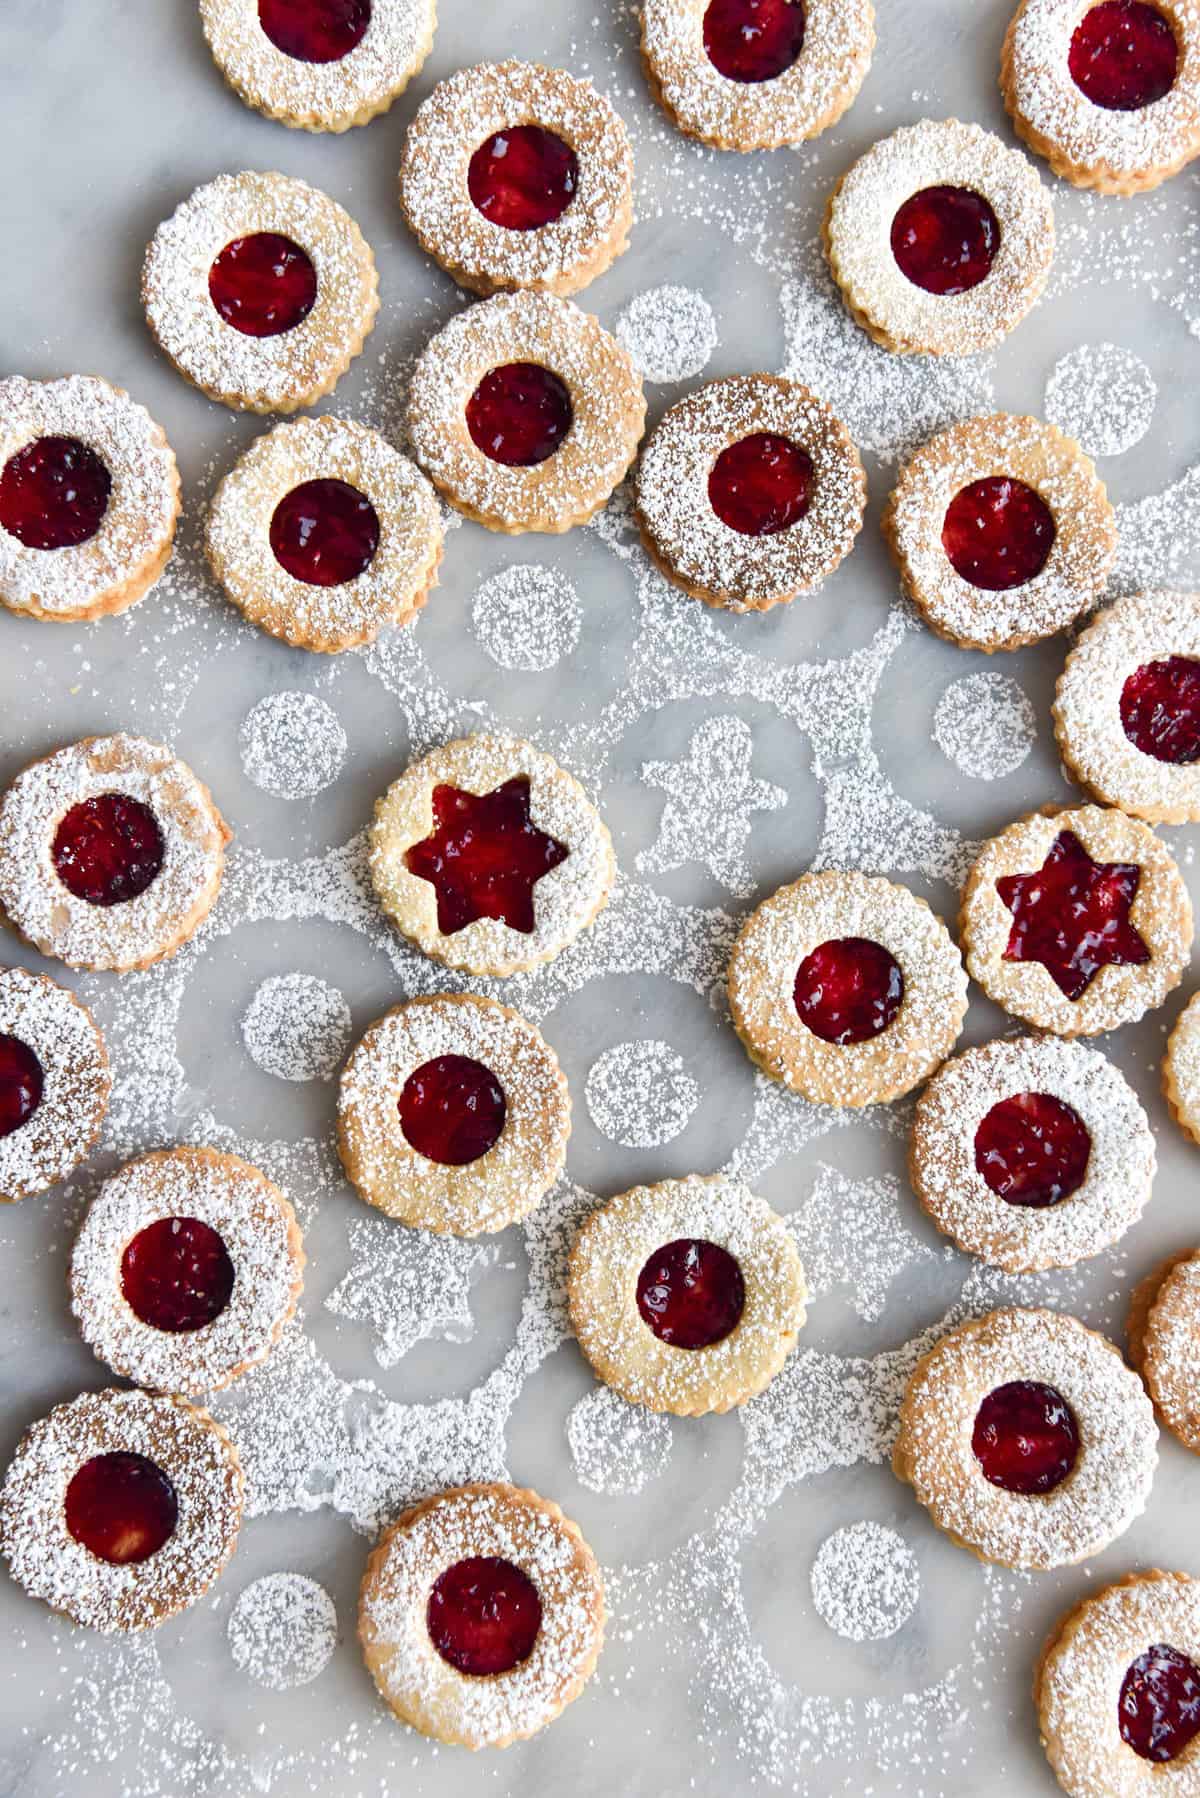 Gluten free linzer cookies dusted in icing sugar on a marble backdrop